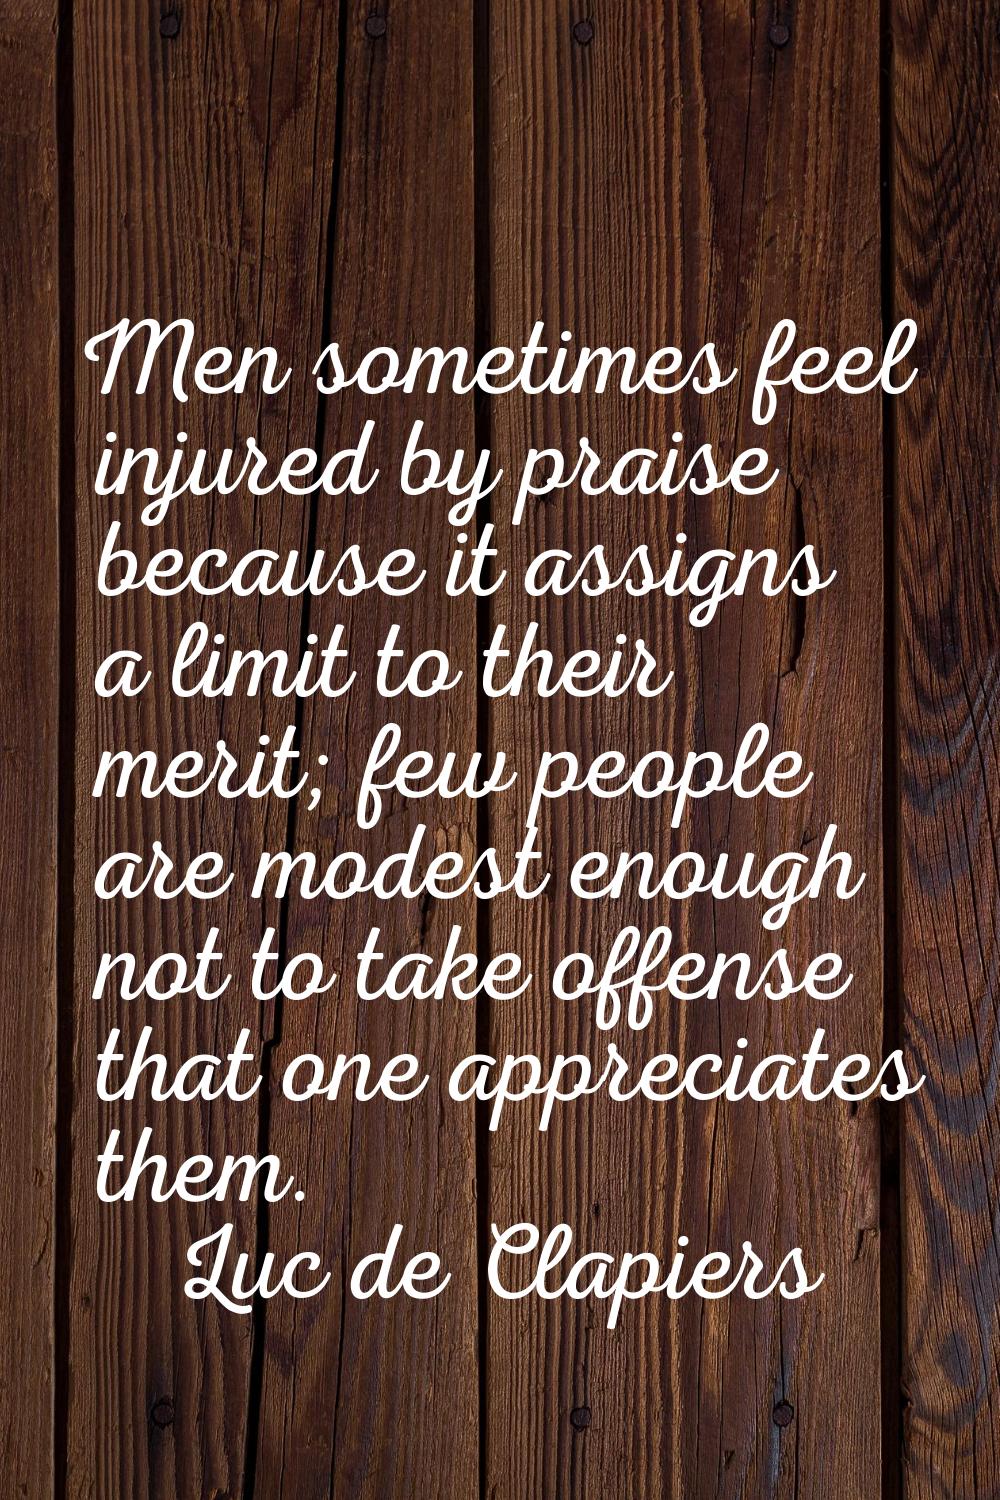 Men sometimes feel injured by praise because it assigns a limit to their merit; few people are mode